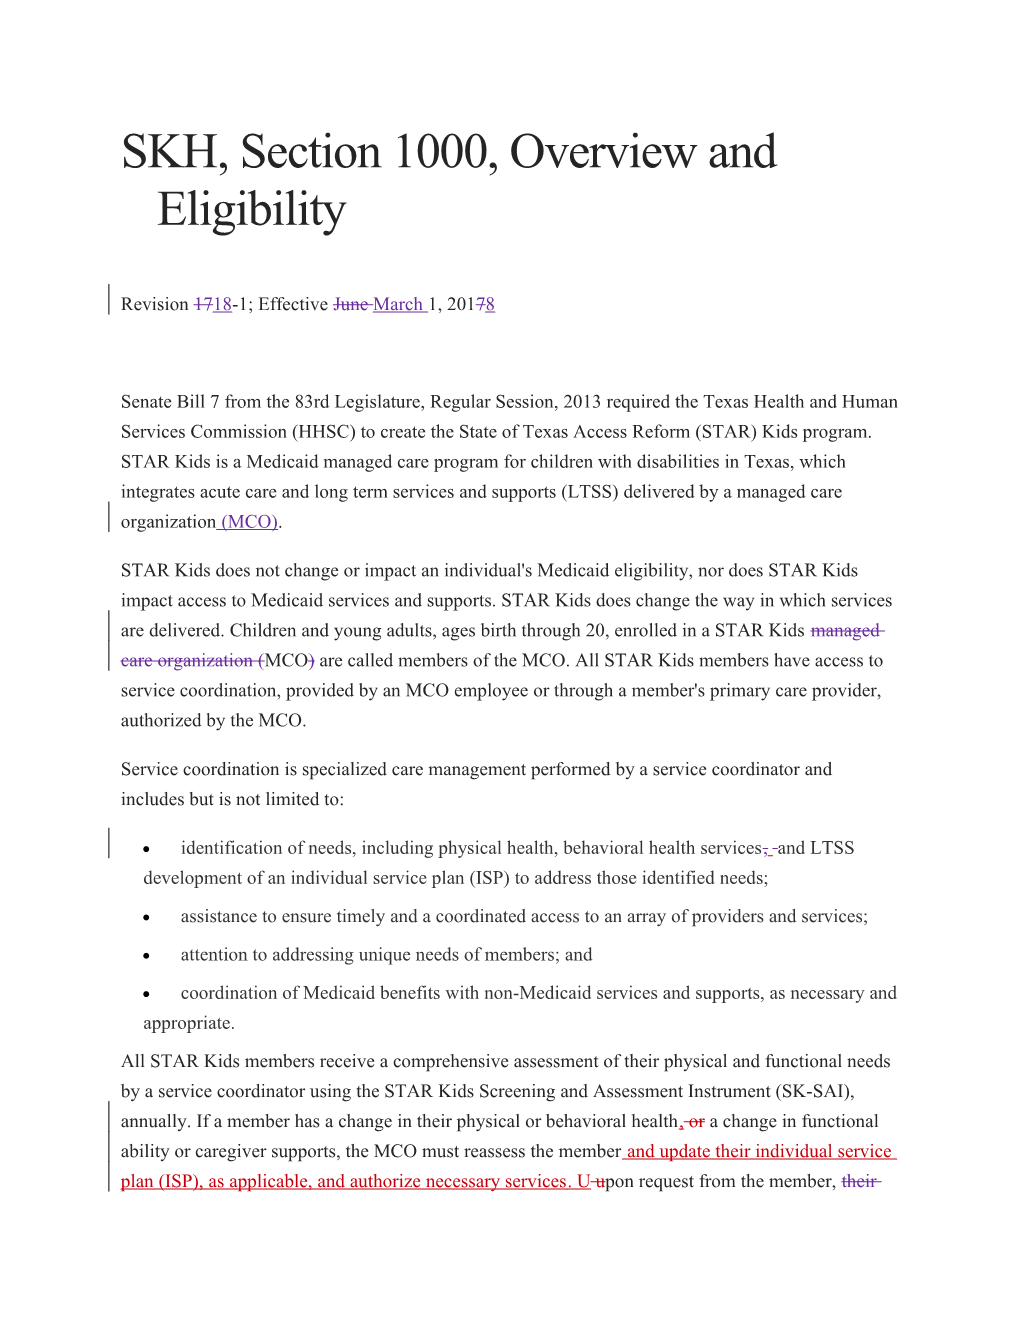 SKH, Section 1000, Overview and Eligibility